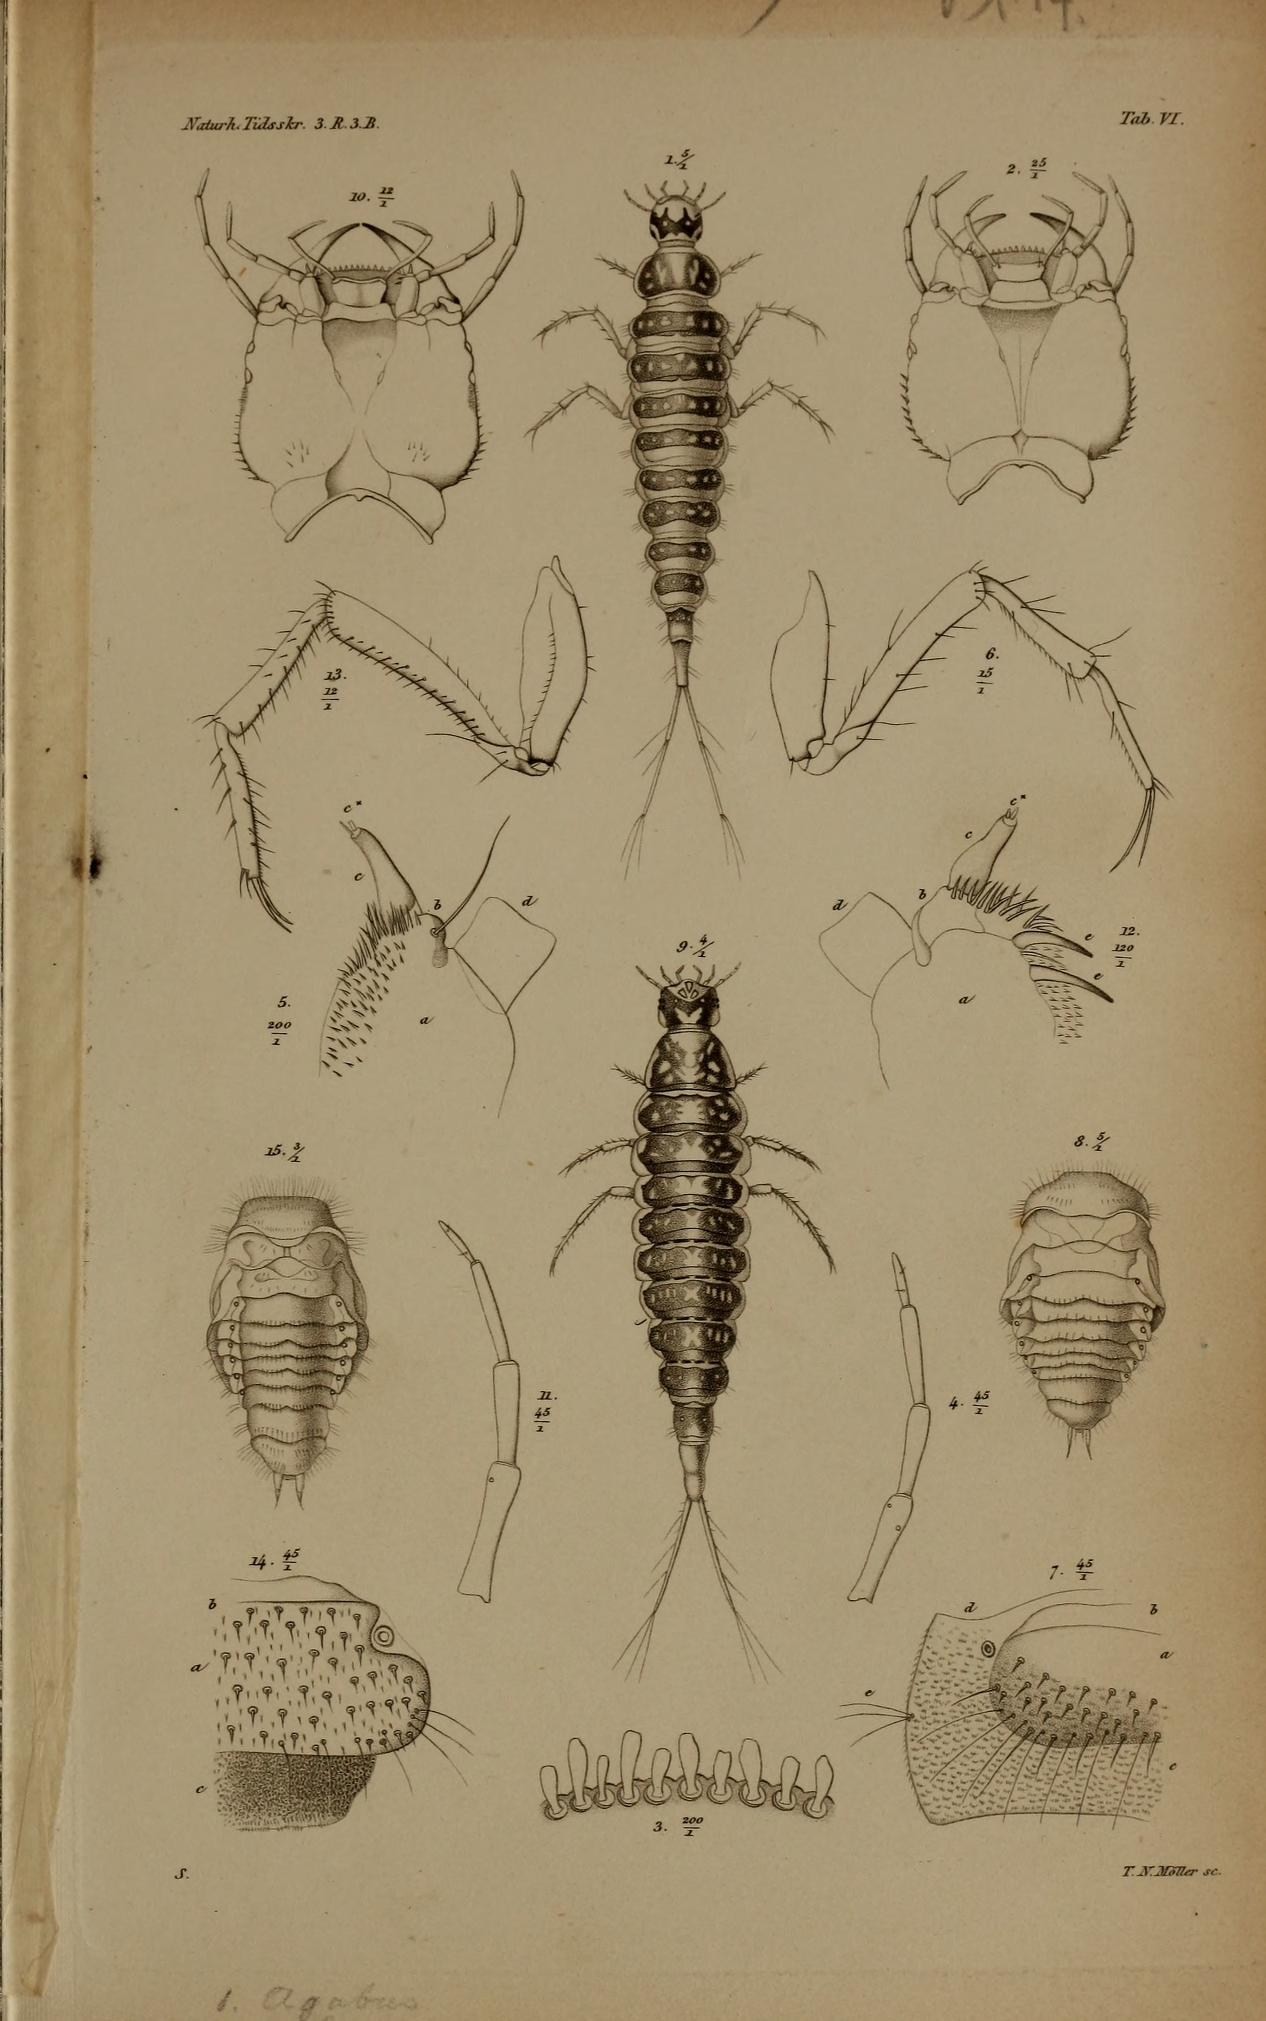 vintage bookplate showing human drawings of bugs and insects